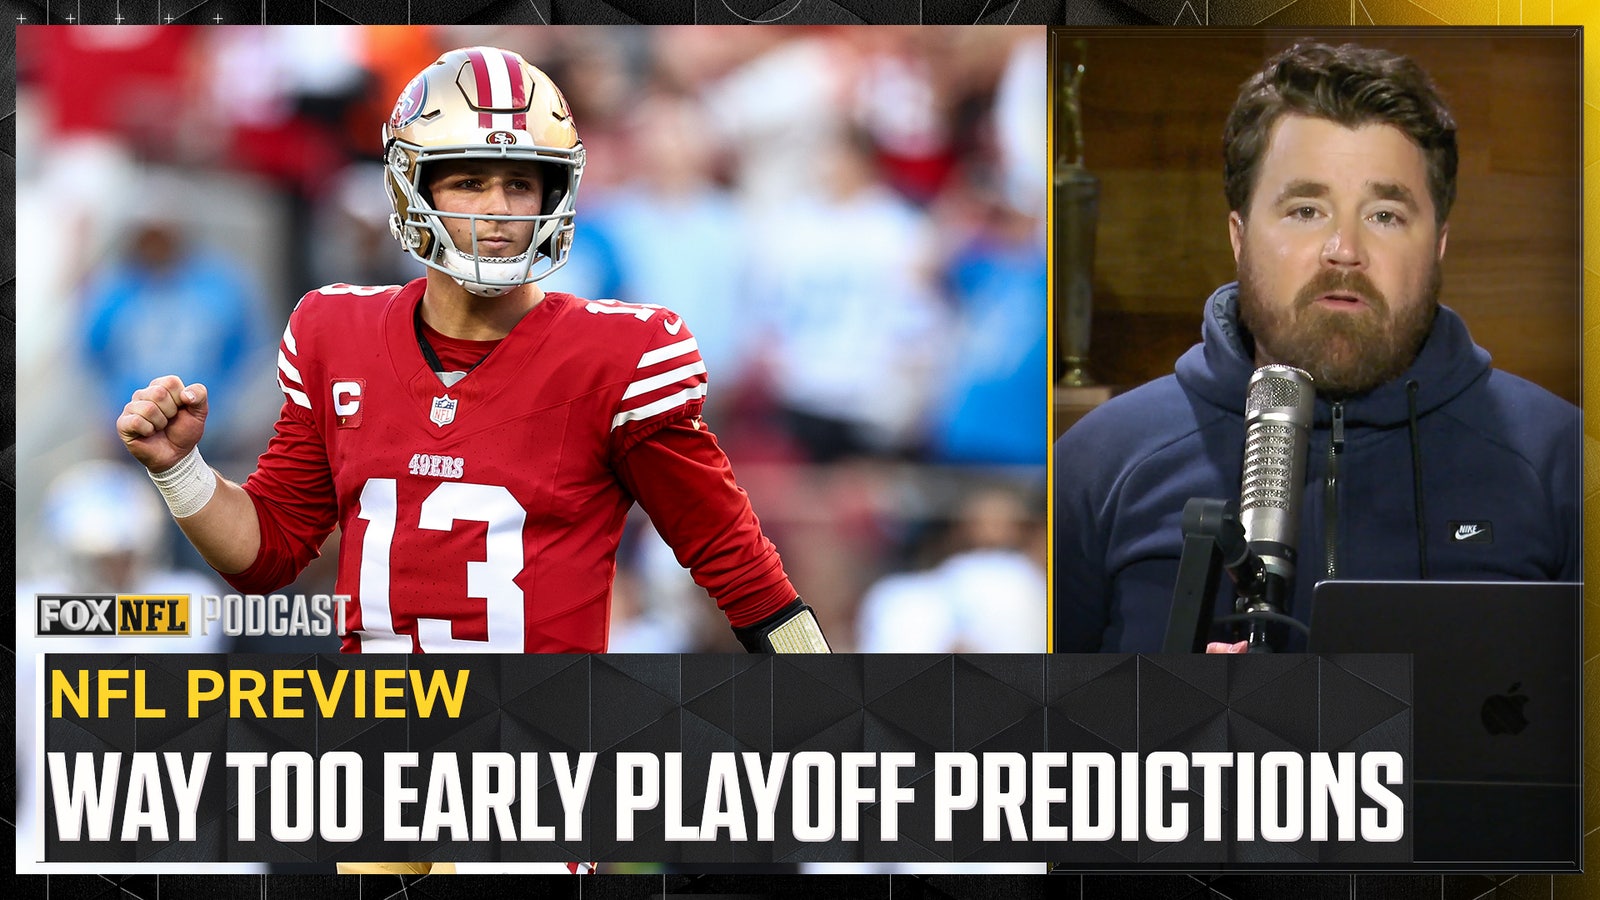 Way-too-early NFL playoff bracket & predictions